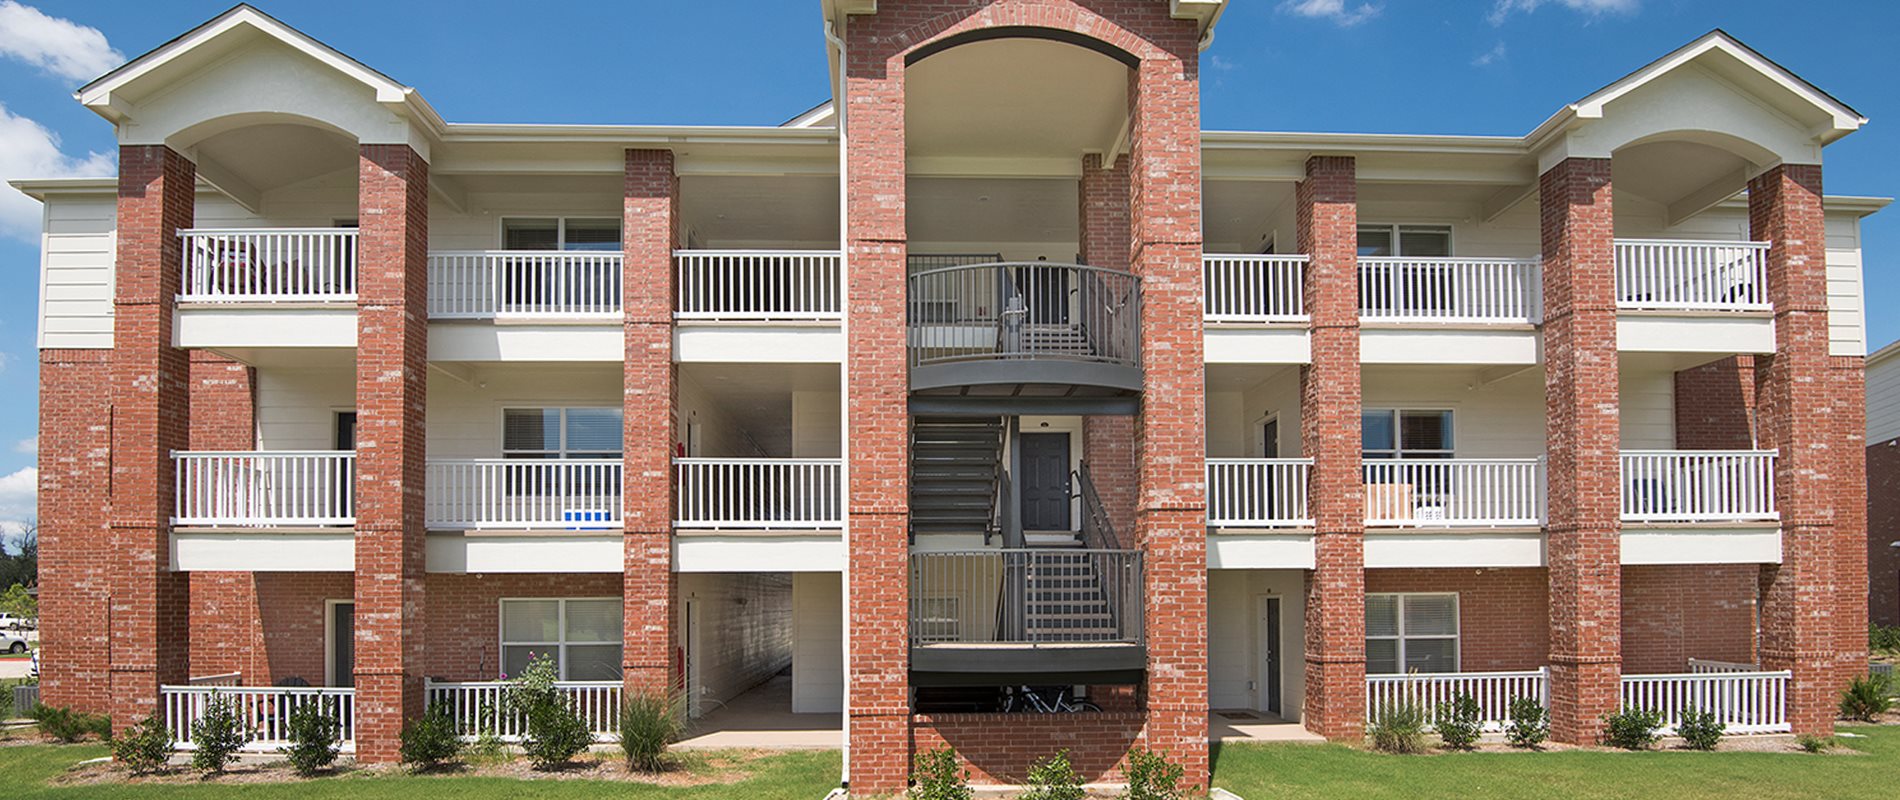 The Trails at Bentonville | Apartments in Bentonville, AR